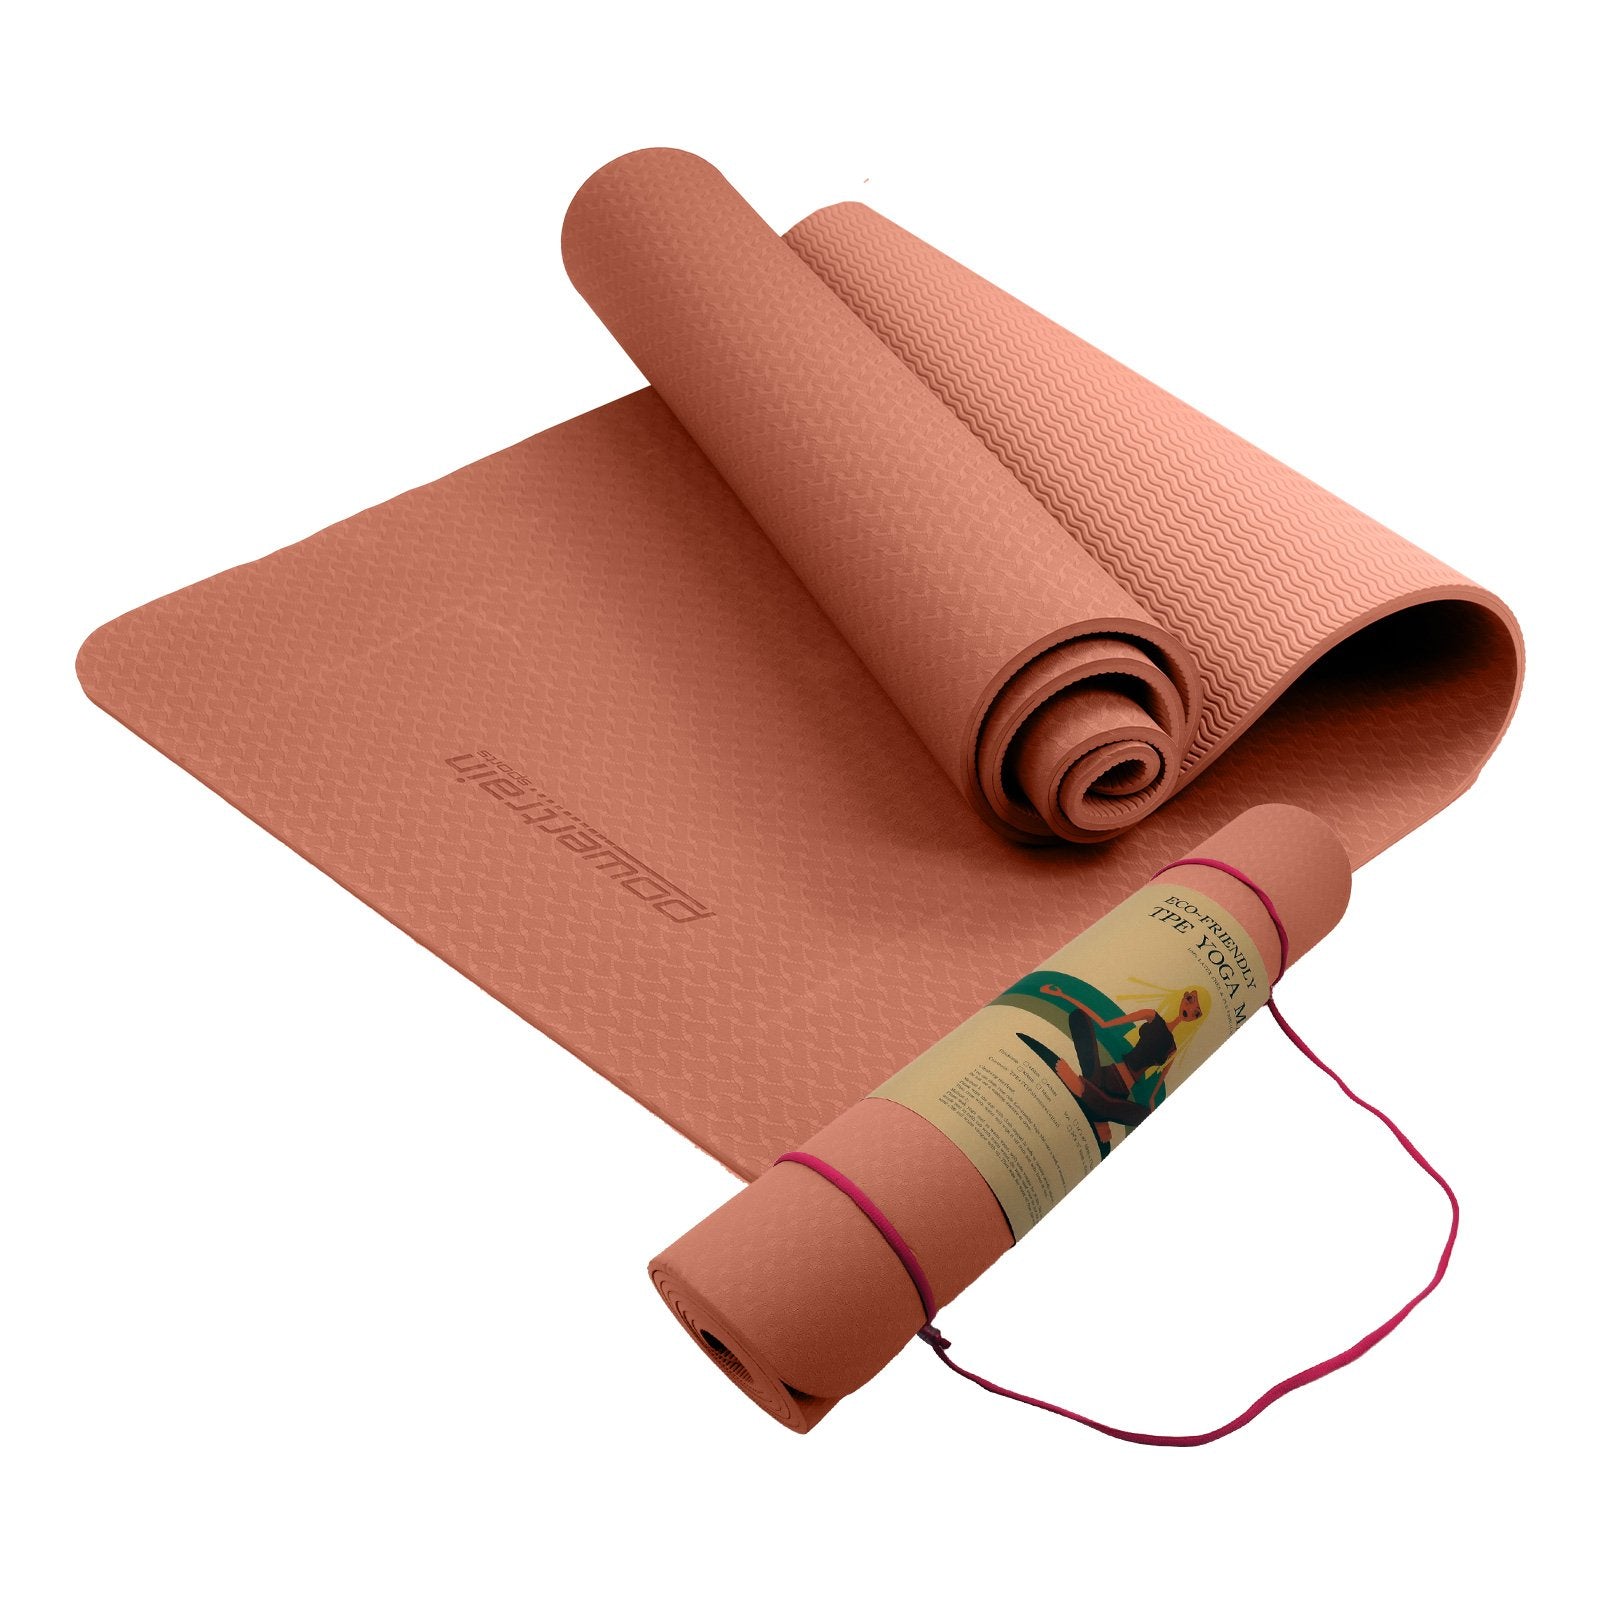 Eco-friendly Dual Layer 6mm Yoga Mat | Peach | Non-slip Surface And Carry Strap For Ultimate Comfort And Portability